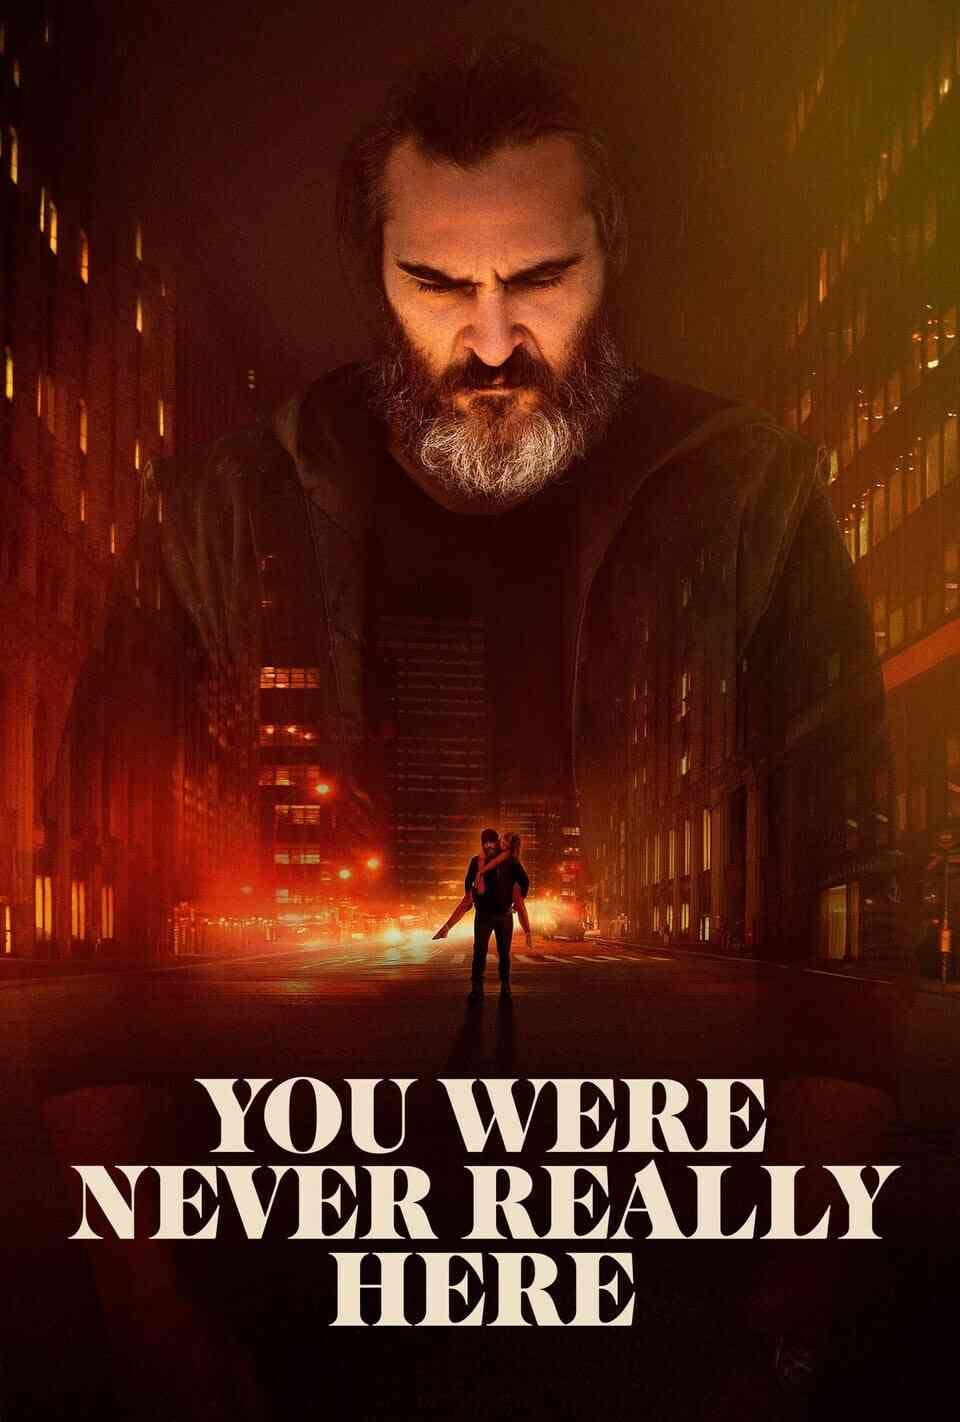 Read You Were Never Really Here screenplay.